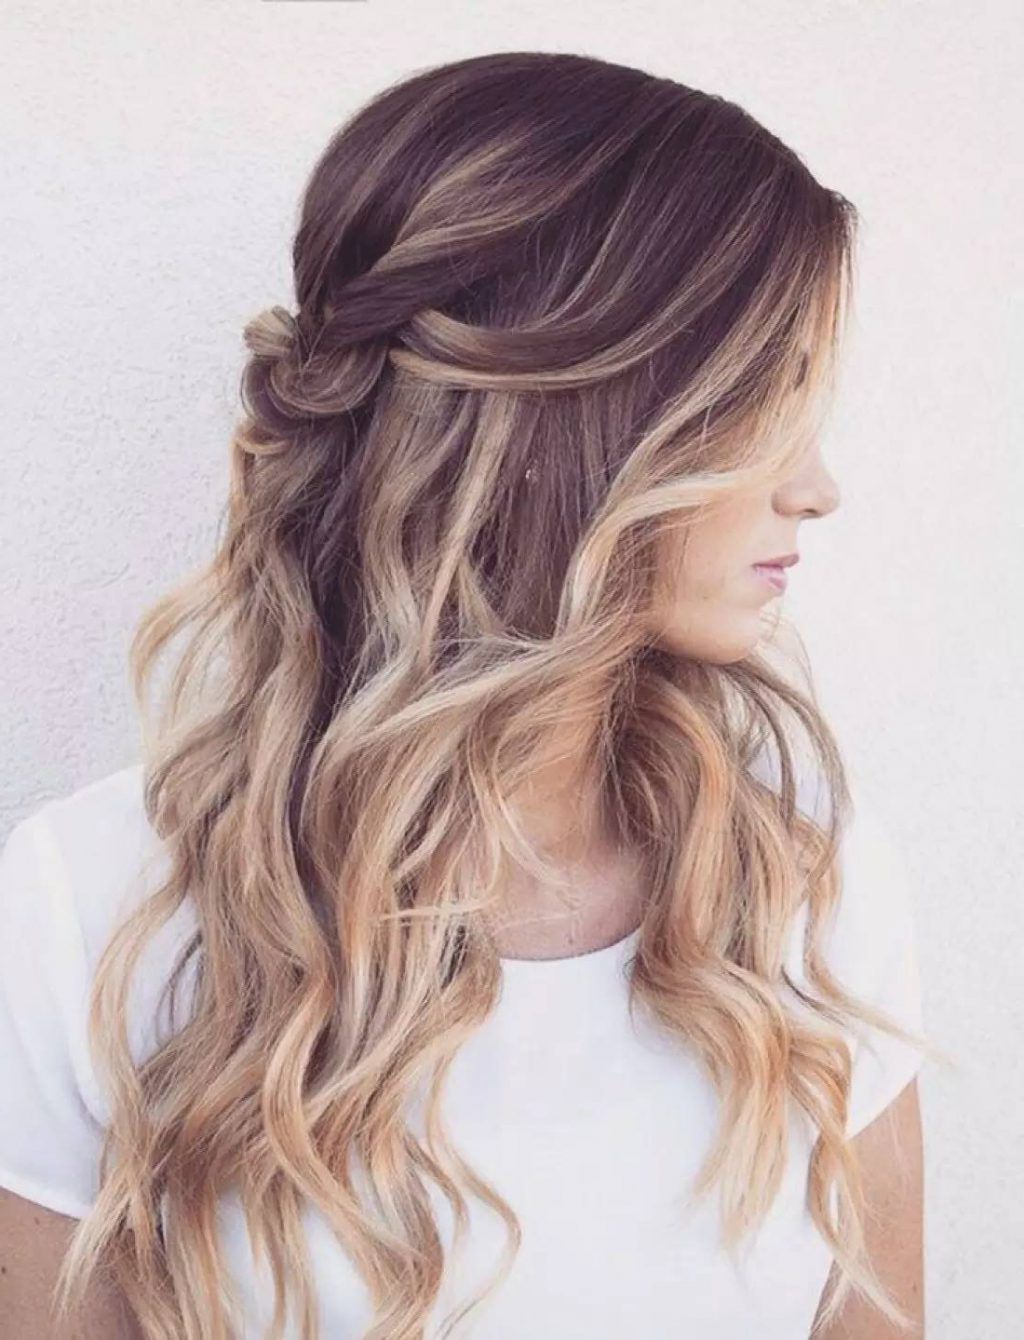 10 Easy Hairstyles For Autumn – Wonder Forest Regarding Most Current Autumn Inspired Hairstyles (View 5 of 25)